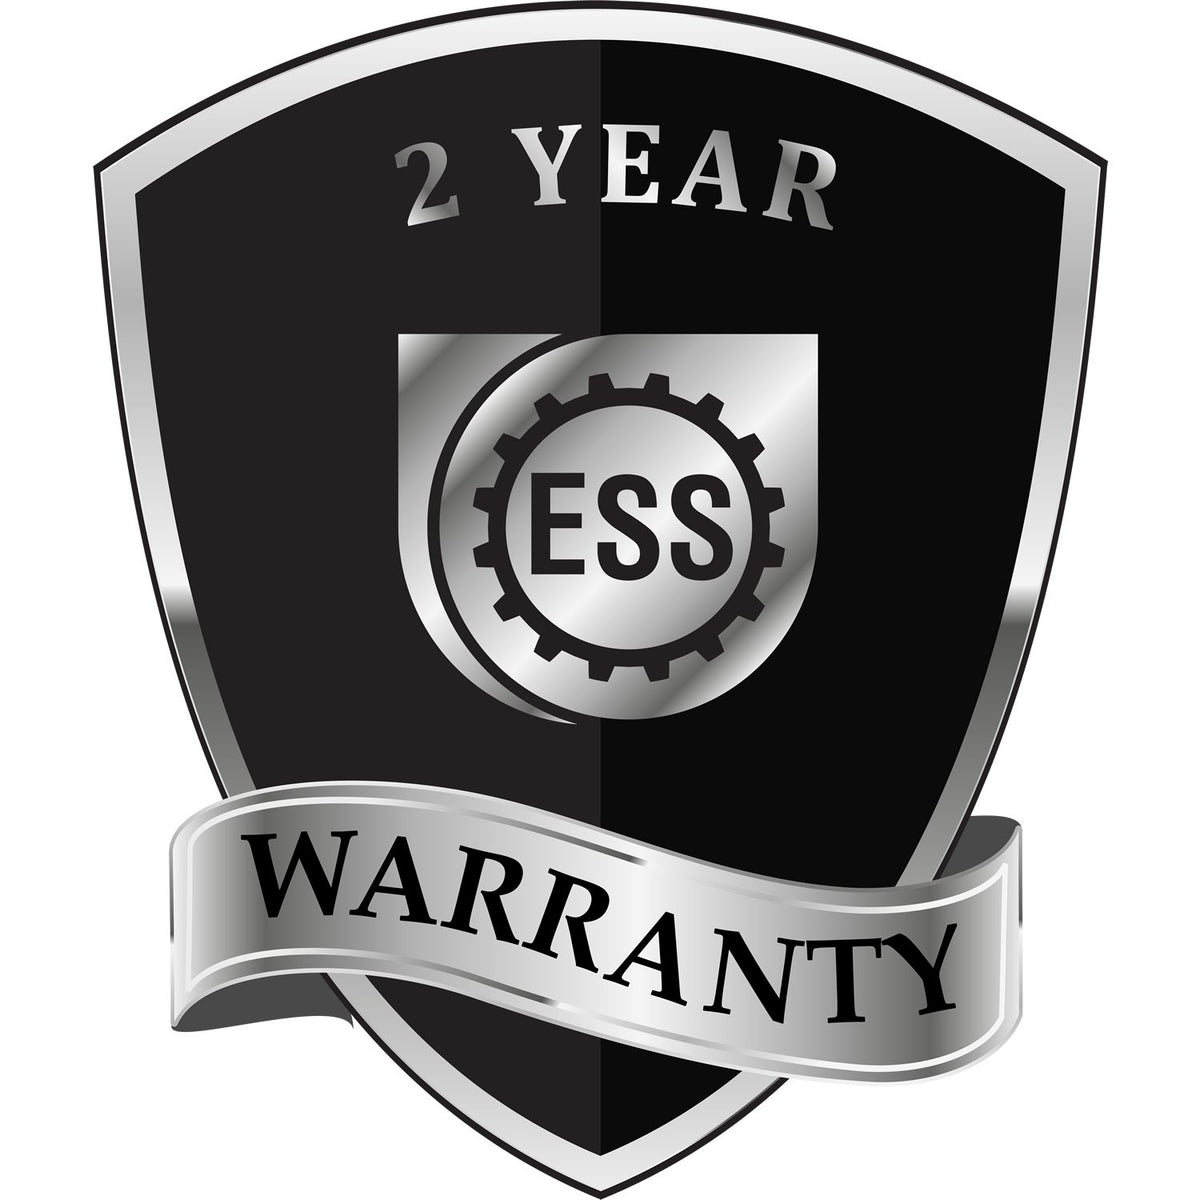 A black and silver badge or emblem showing warranty information for the Gift Louisiana Landscape Architect Seal